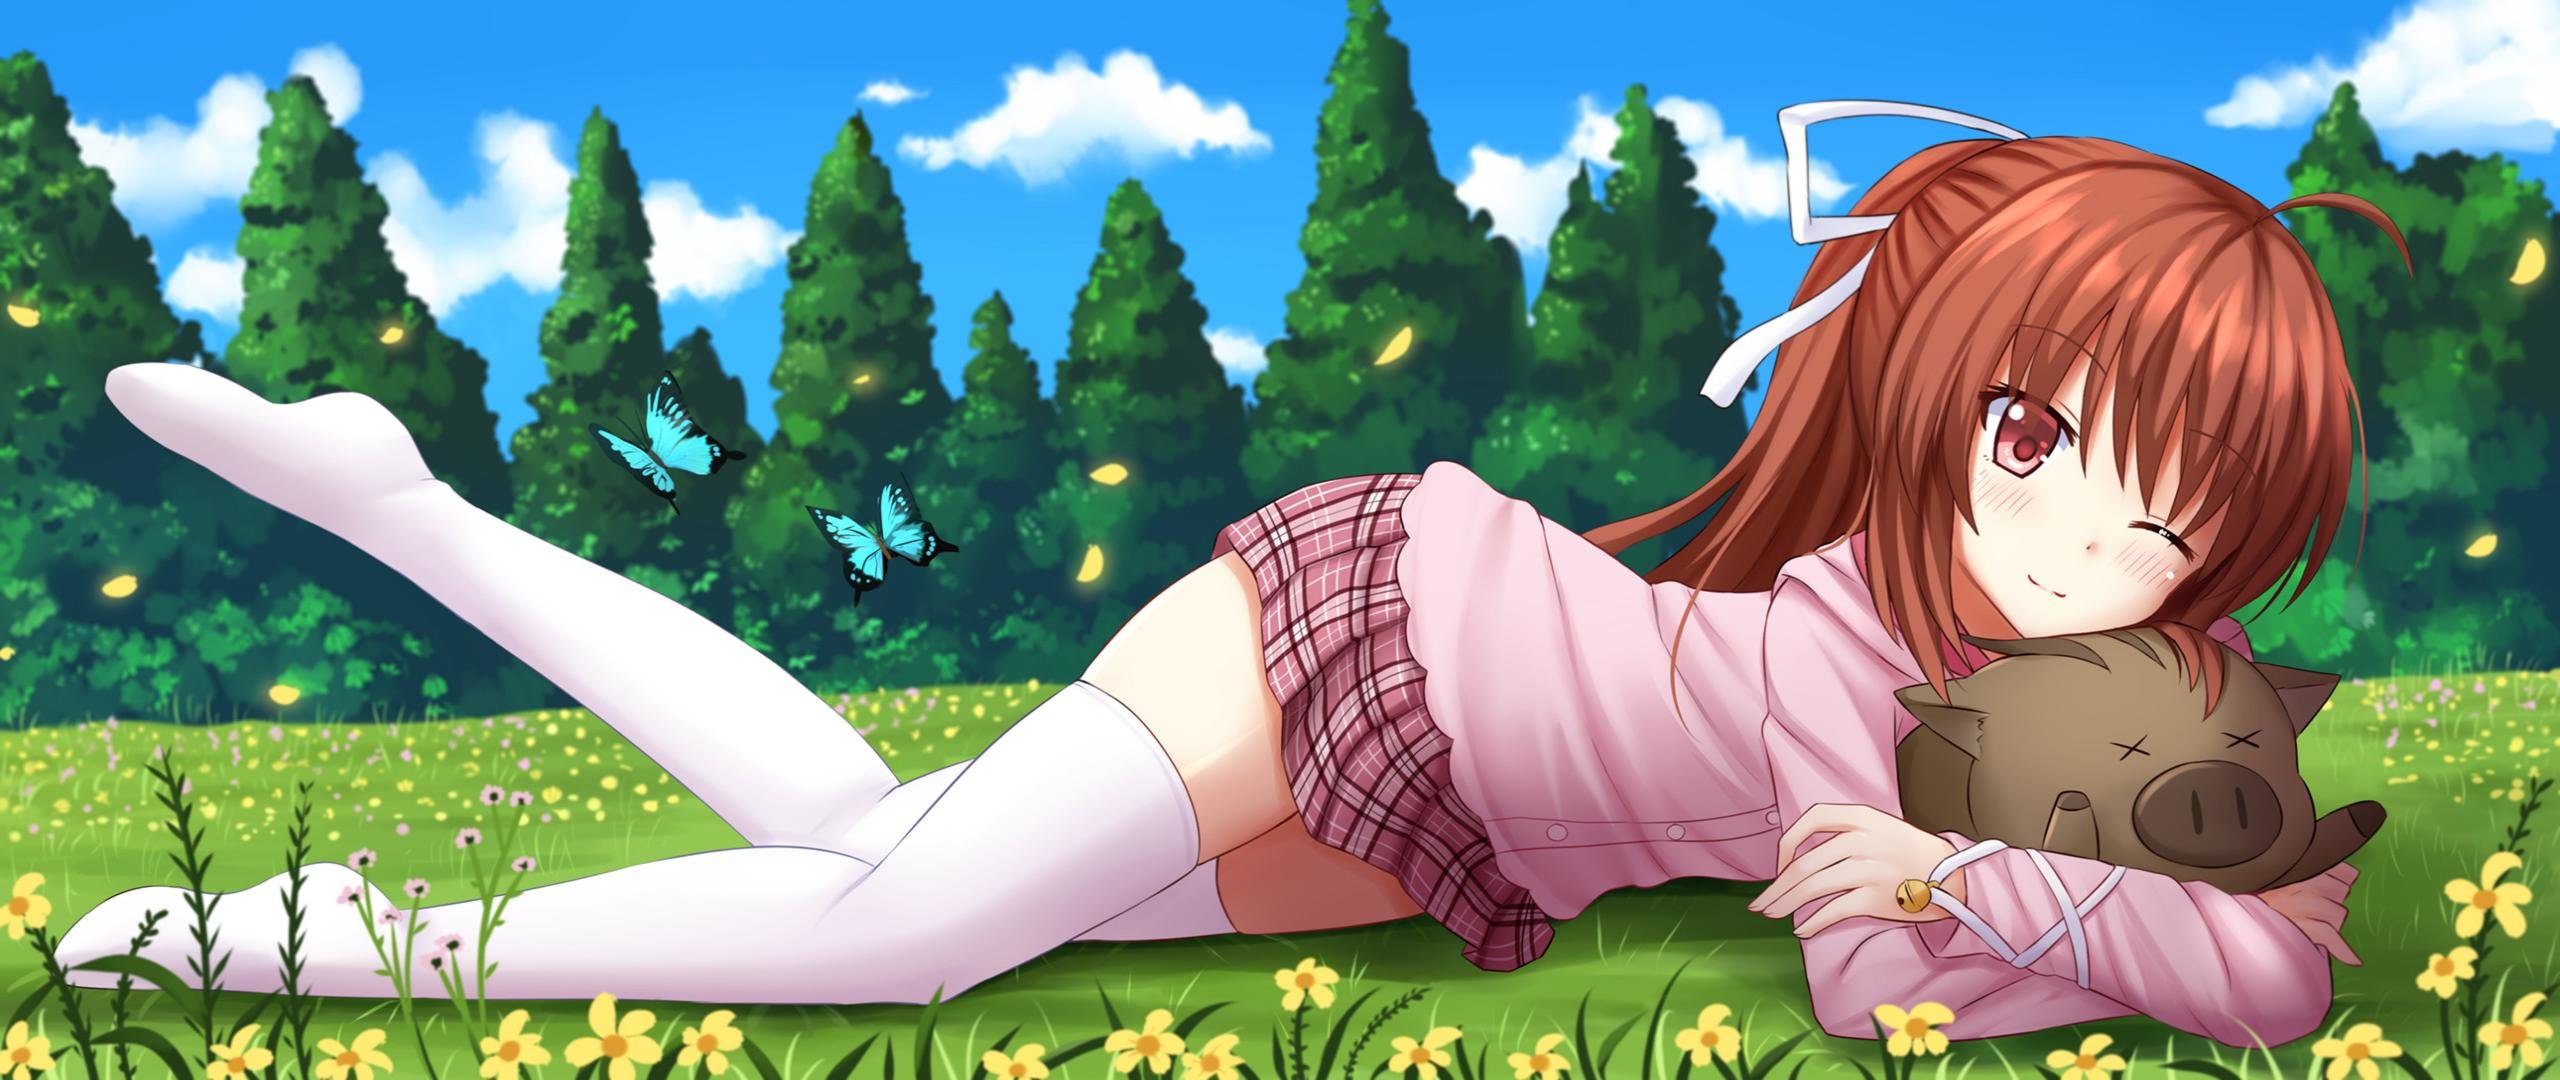 Download hd 2560x1080 Little Busters! desktop background ID:164828 for free